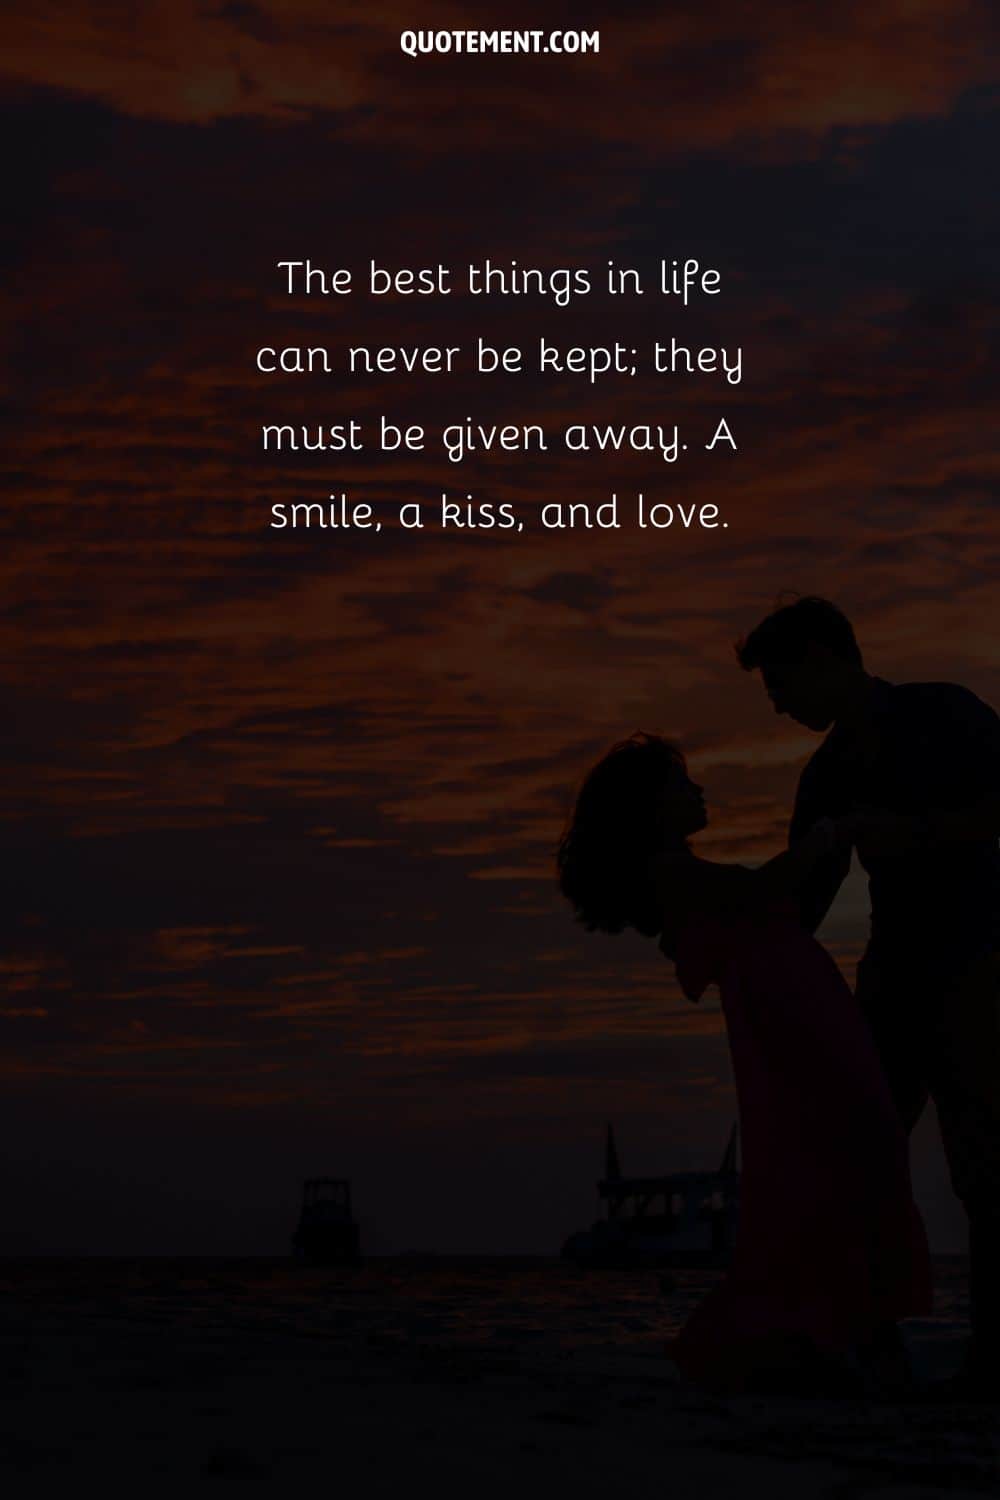 The best things in life can never be kept; they must be given away. A smile, a kiss, and love